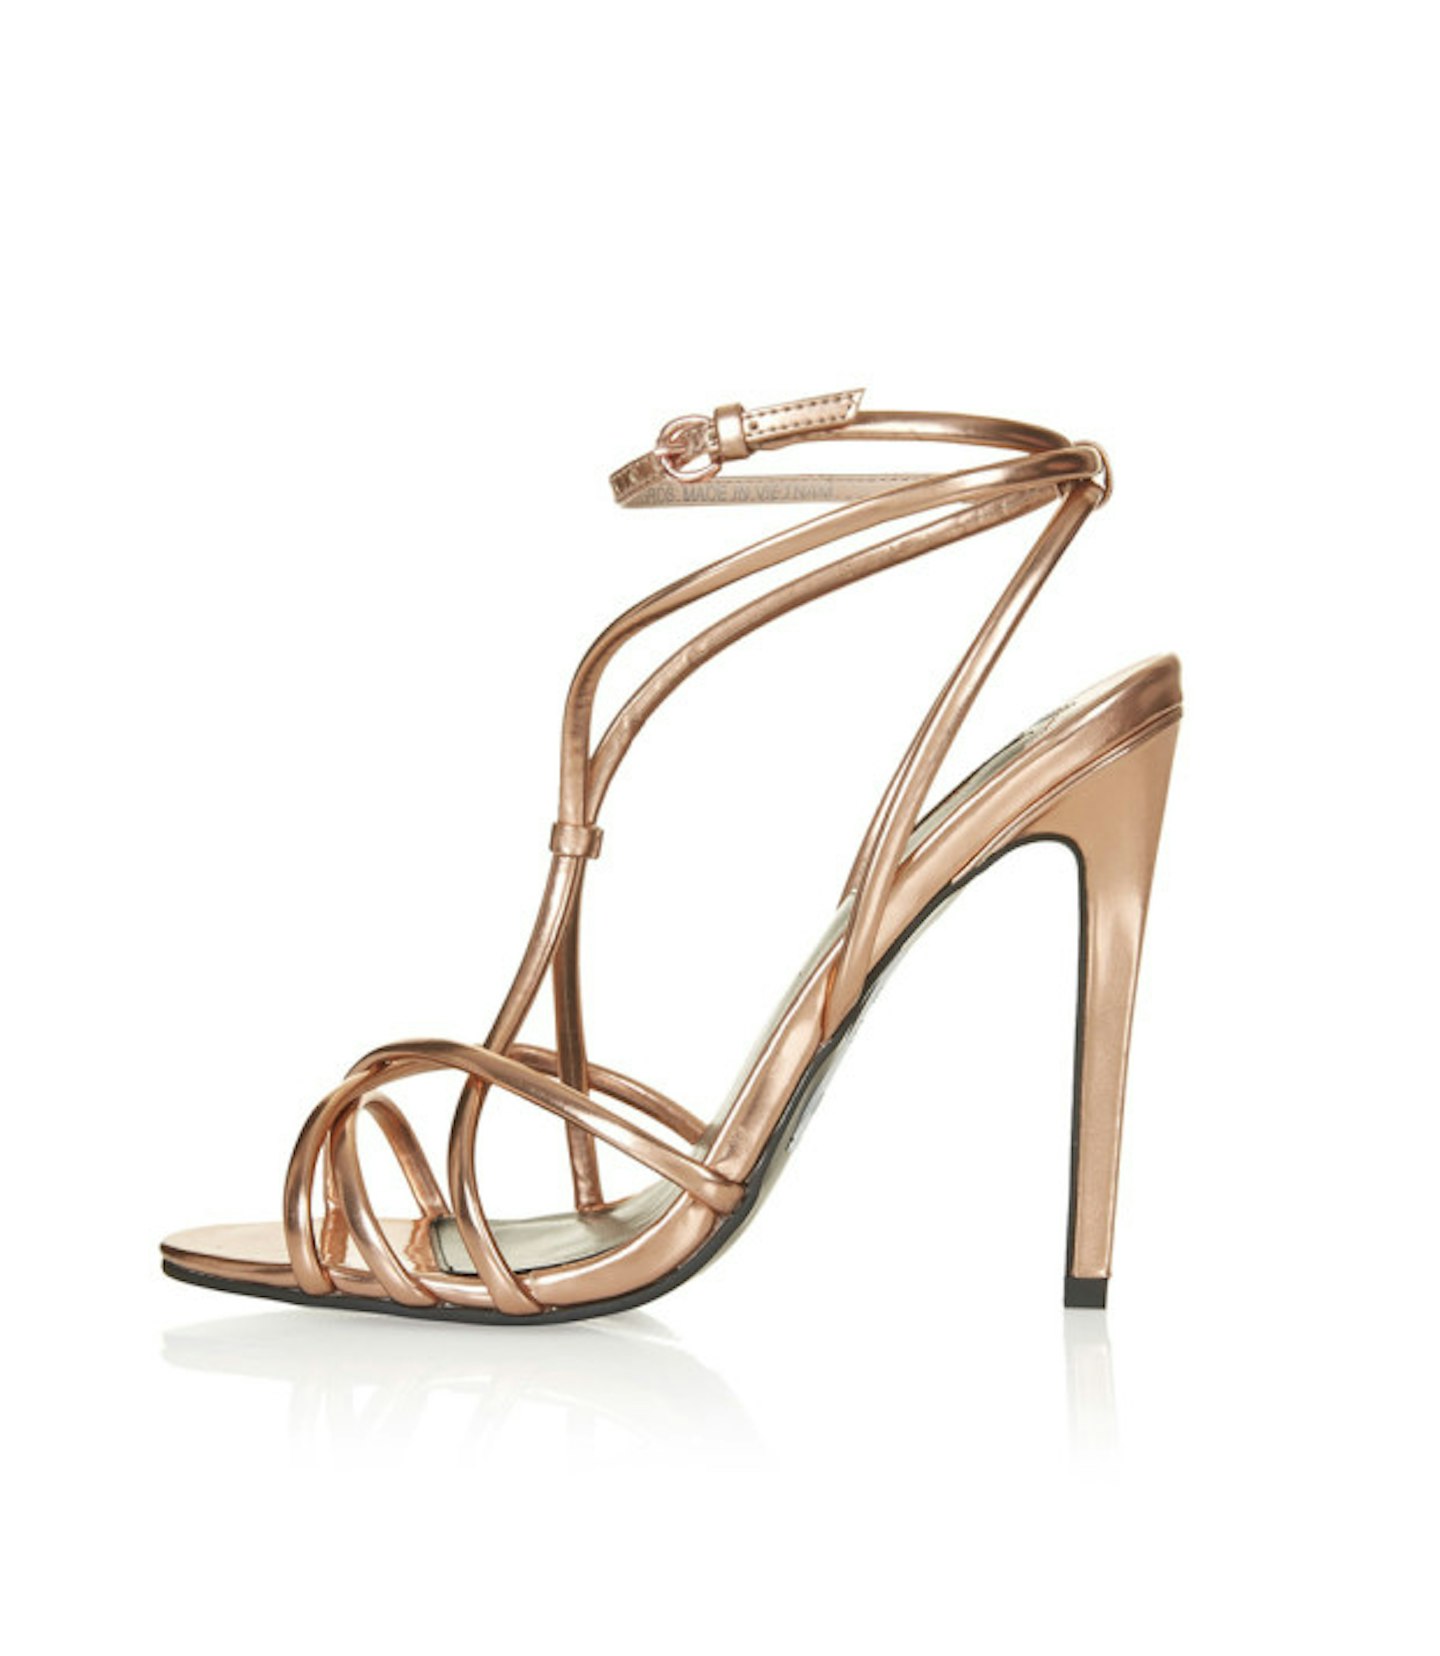 Rose gold strappy sandals